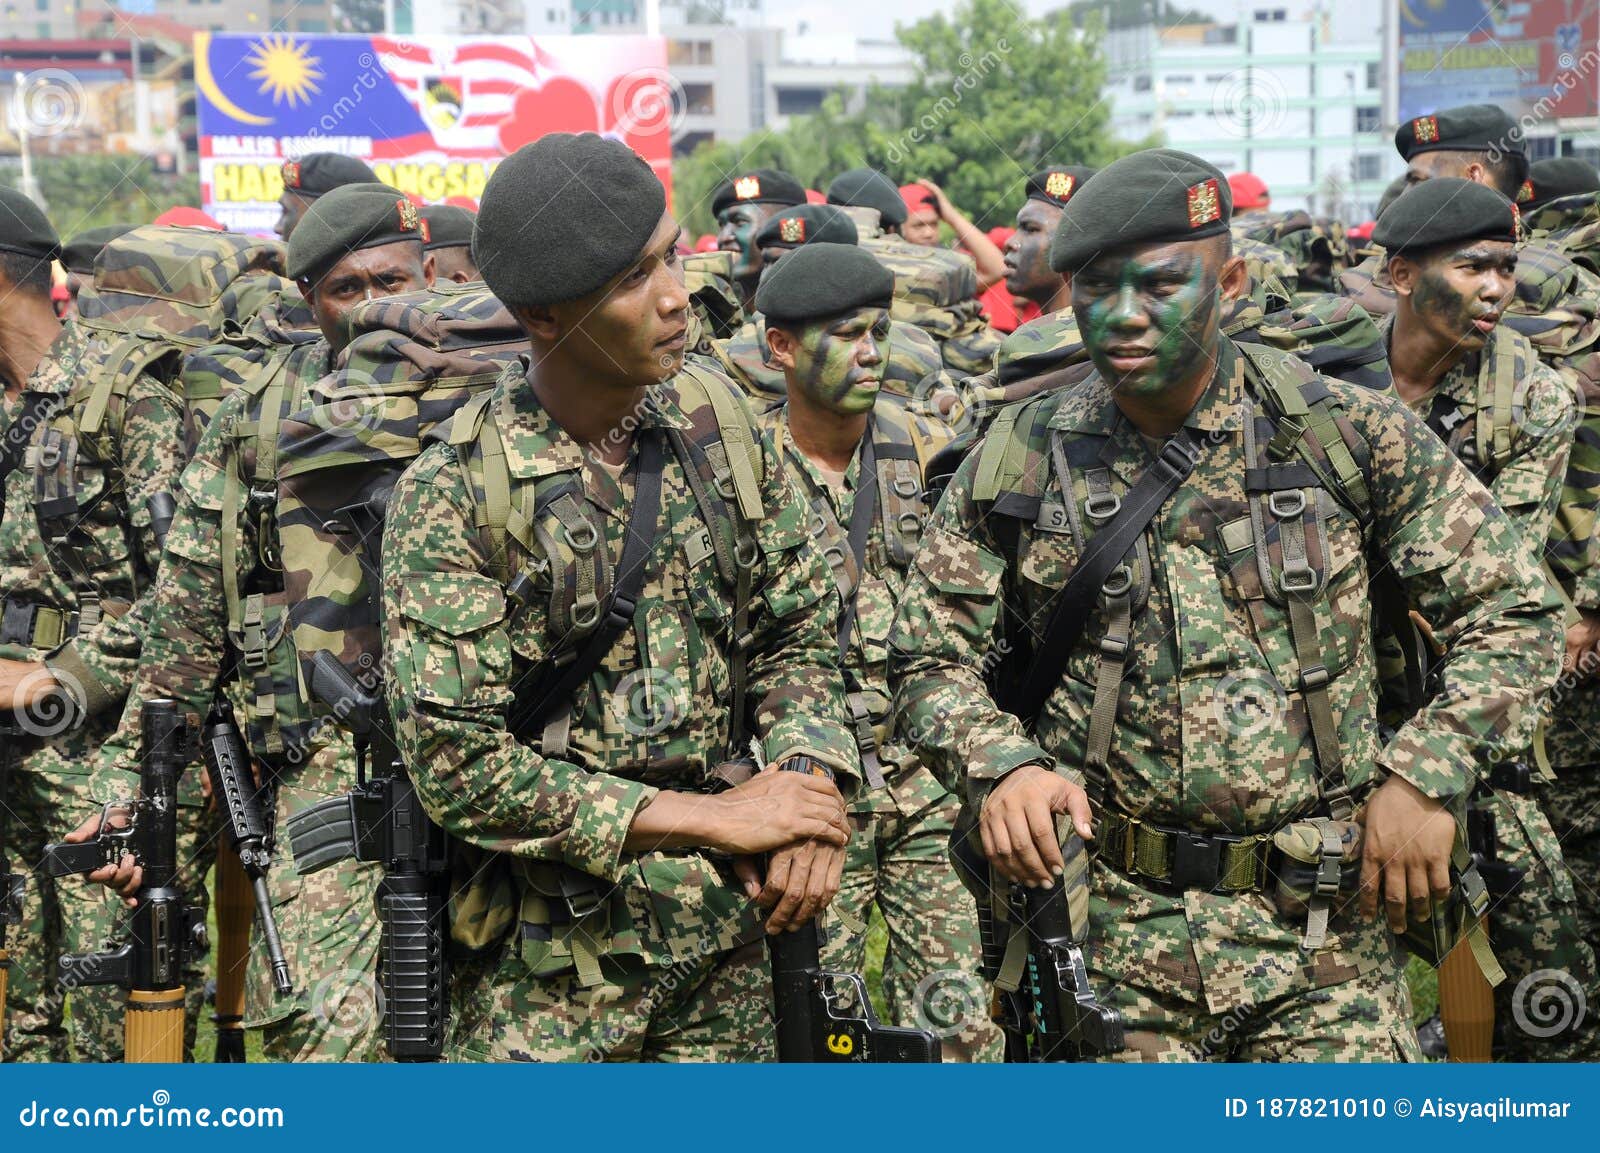 Malaysian Soldiers in Uniform and Fully Armed. Editorial Image  Image